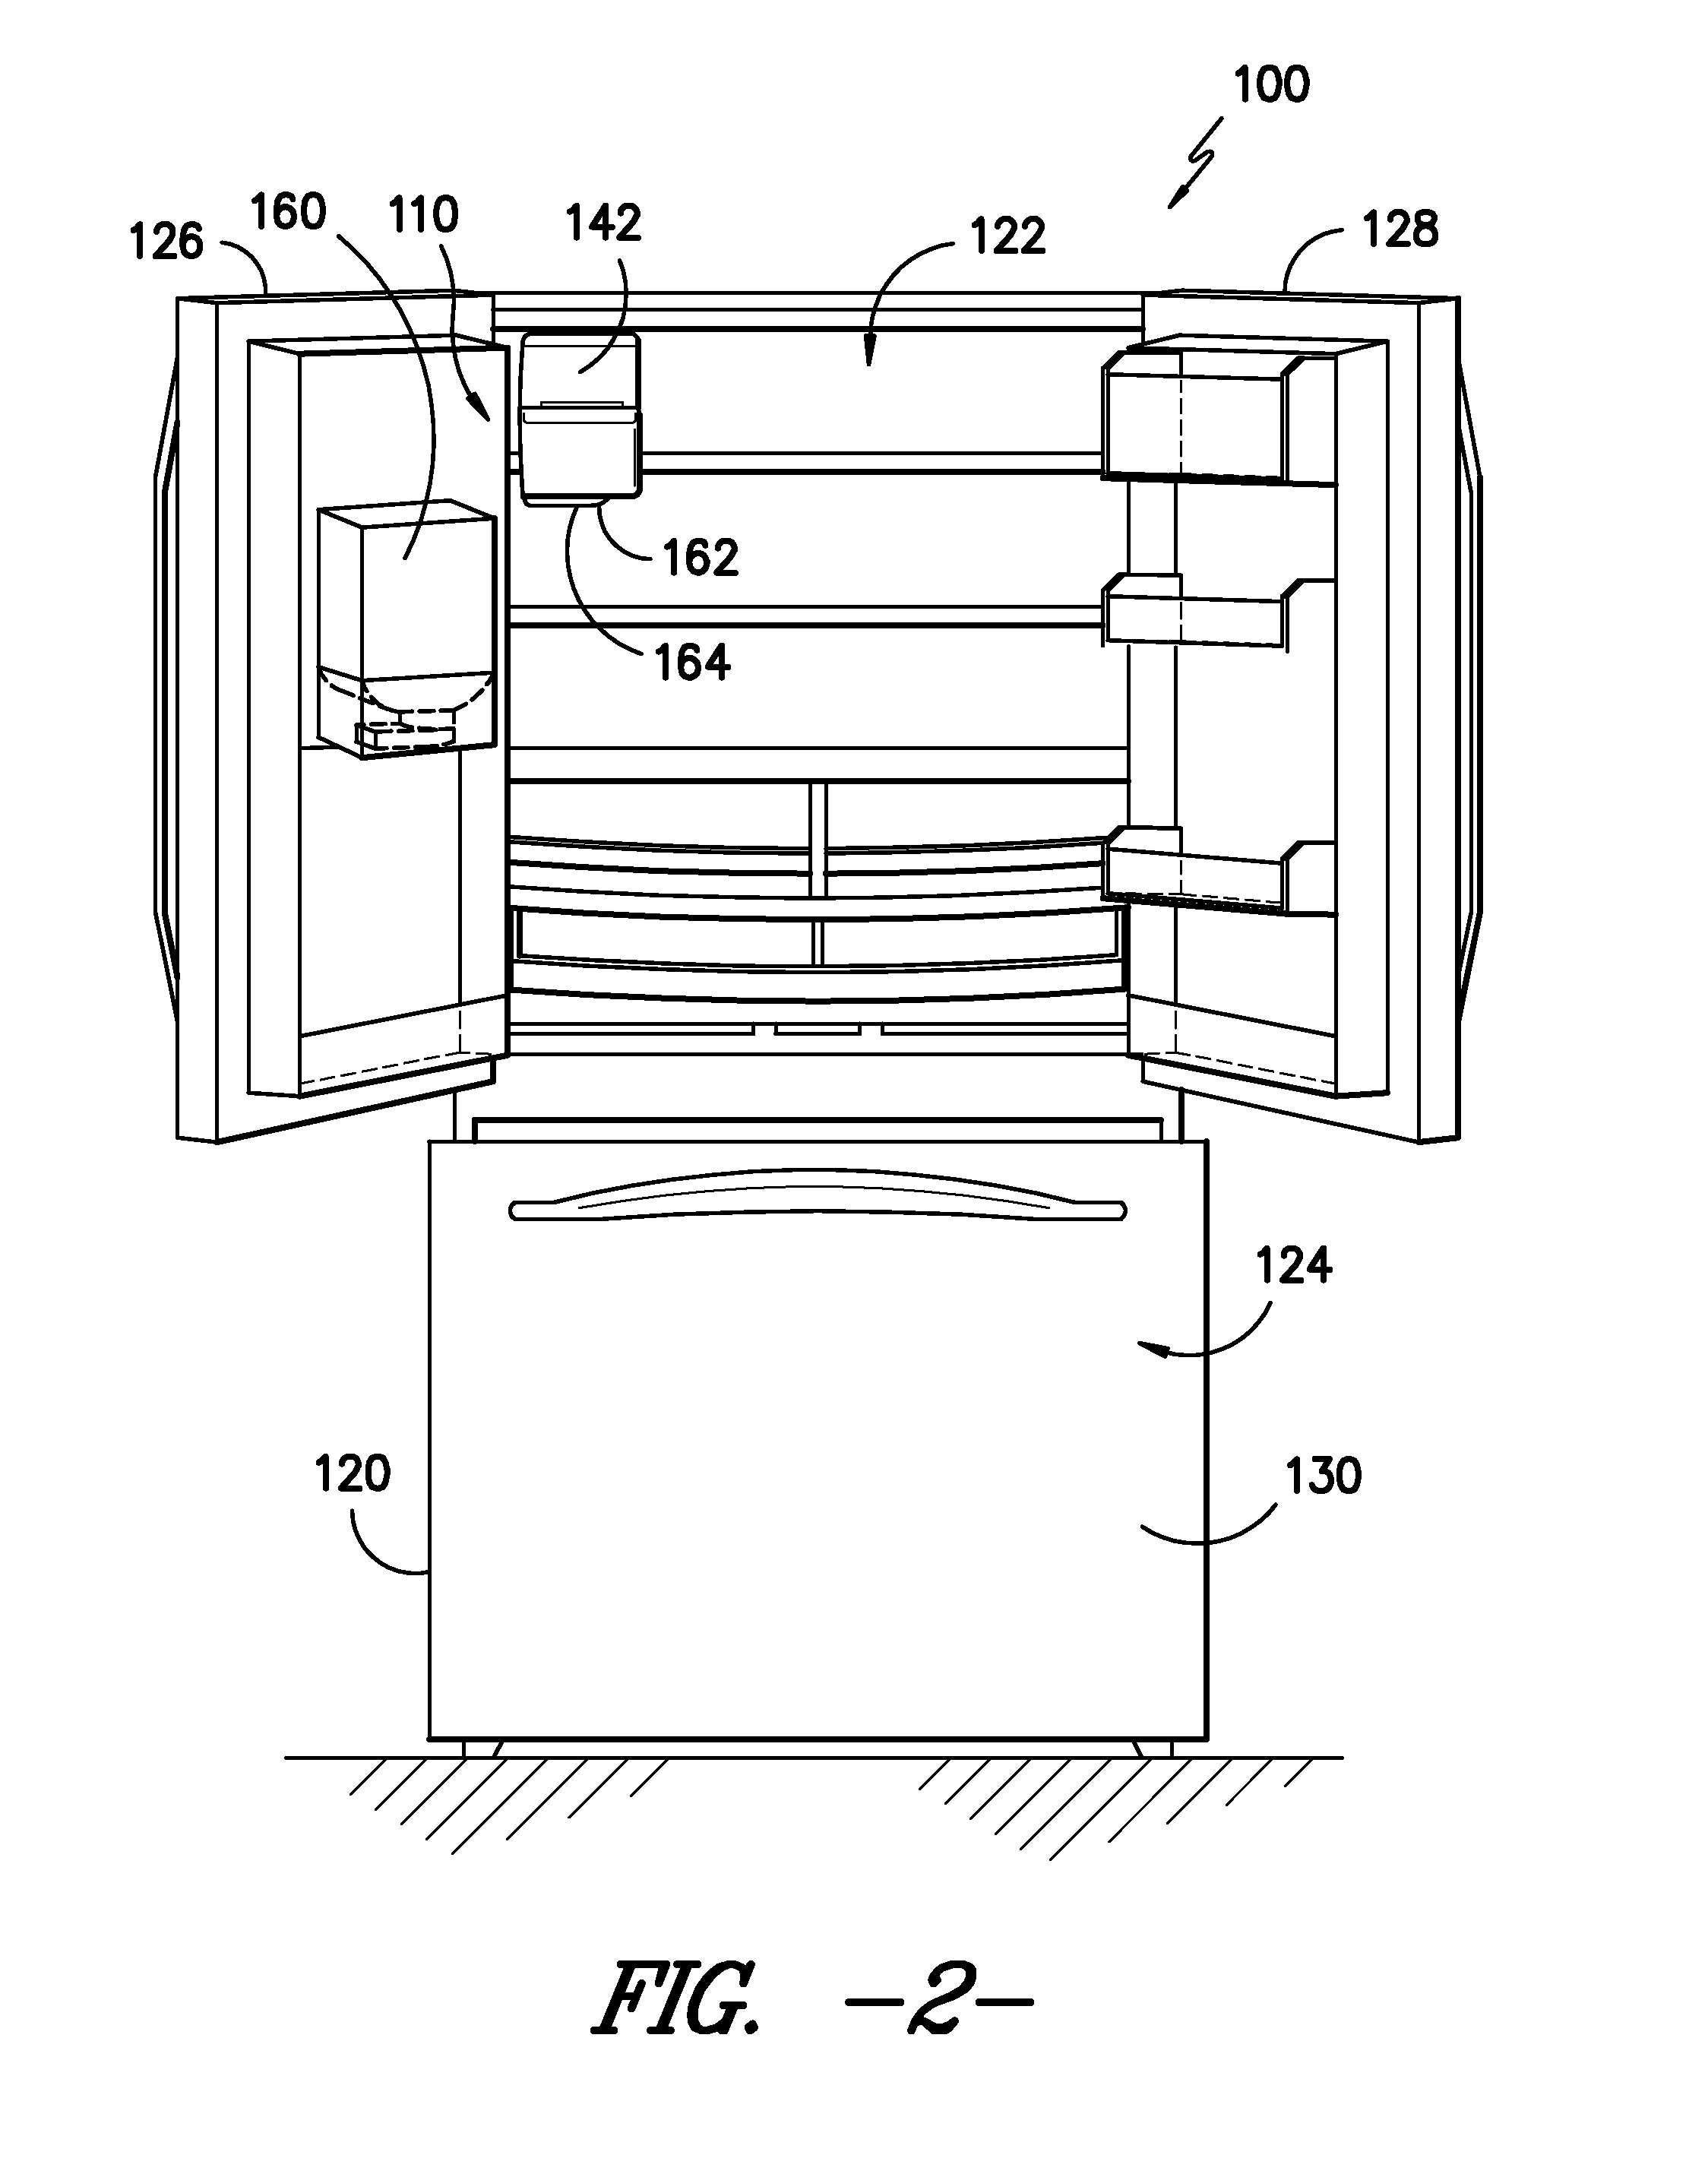 Refrigerator appliance with features for assisted dispensing